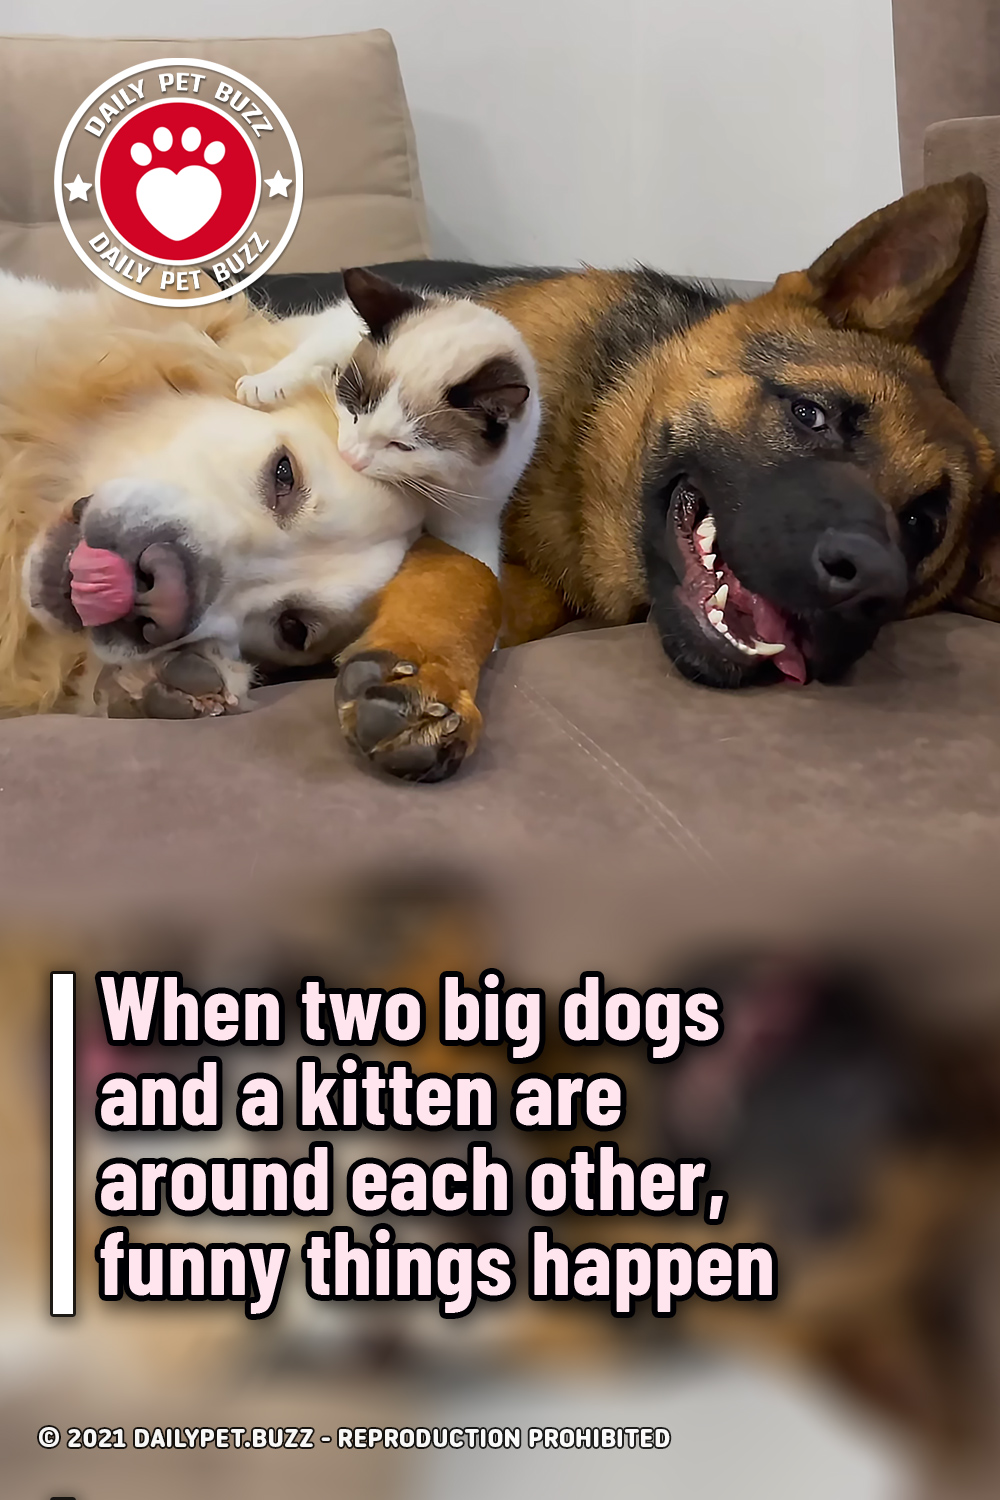 When two big dogs and a kitten are around each other, funny things happen